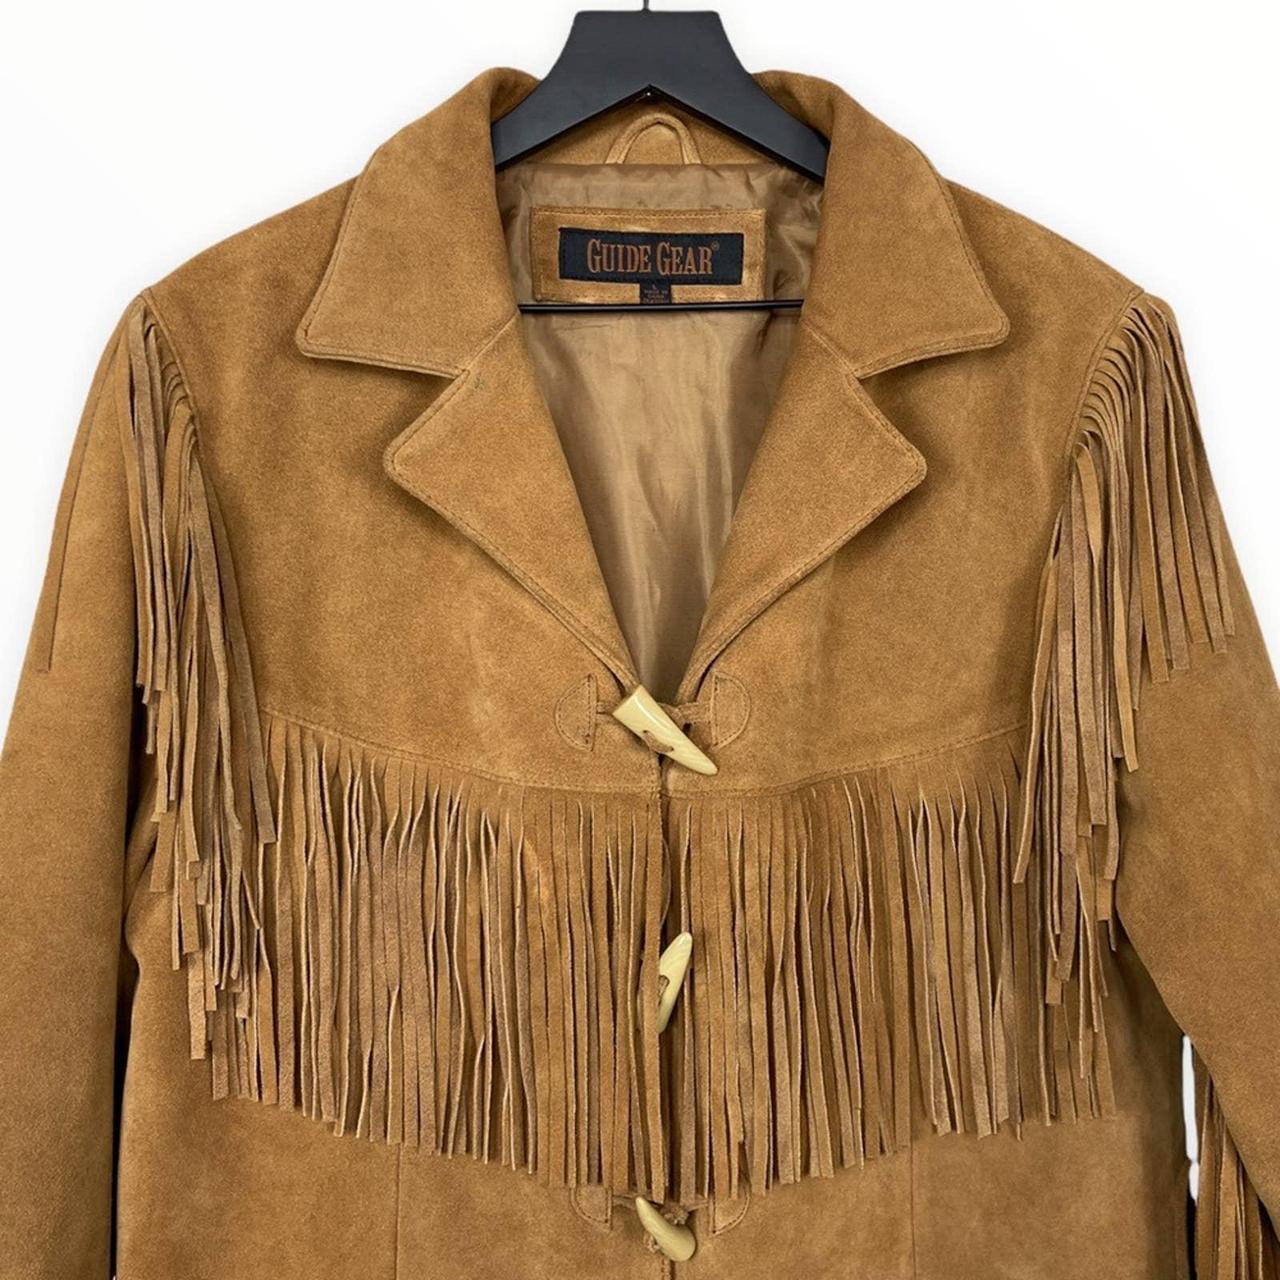 Product Image 2 - Western Style Jacket in a